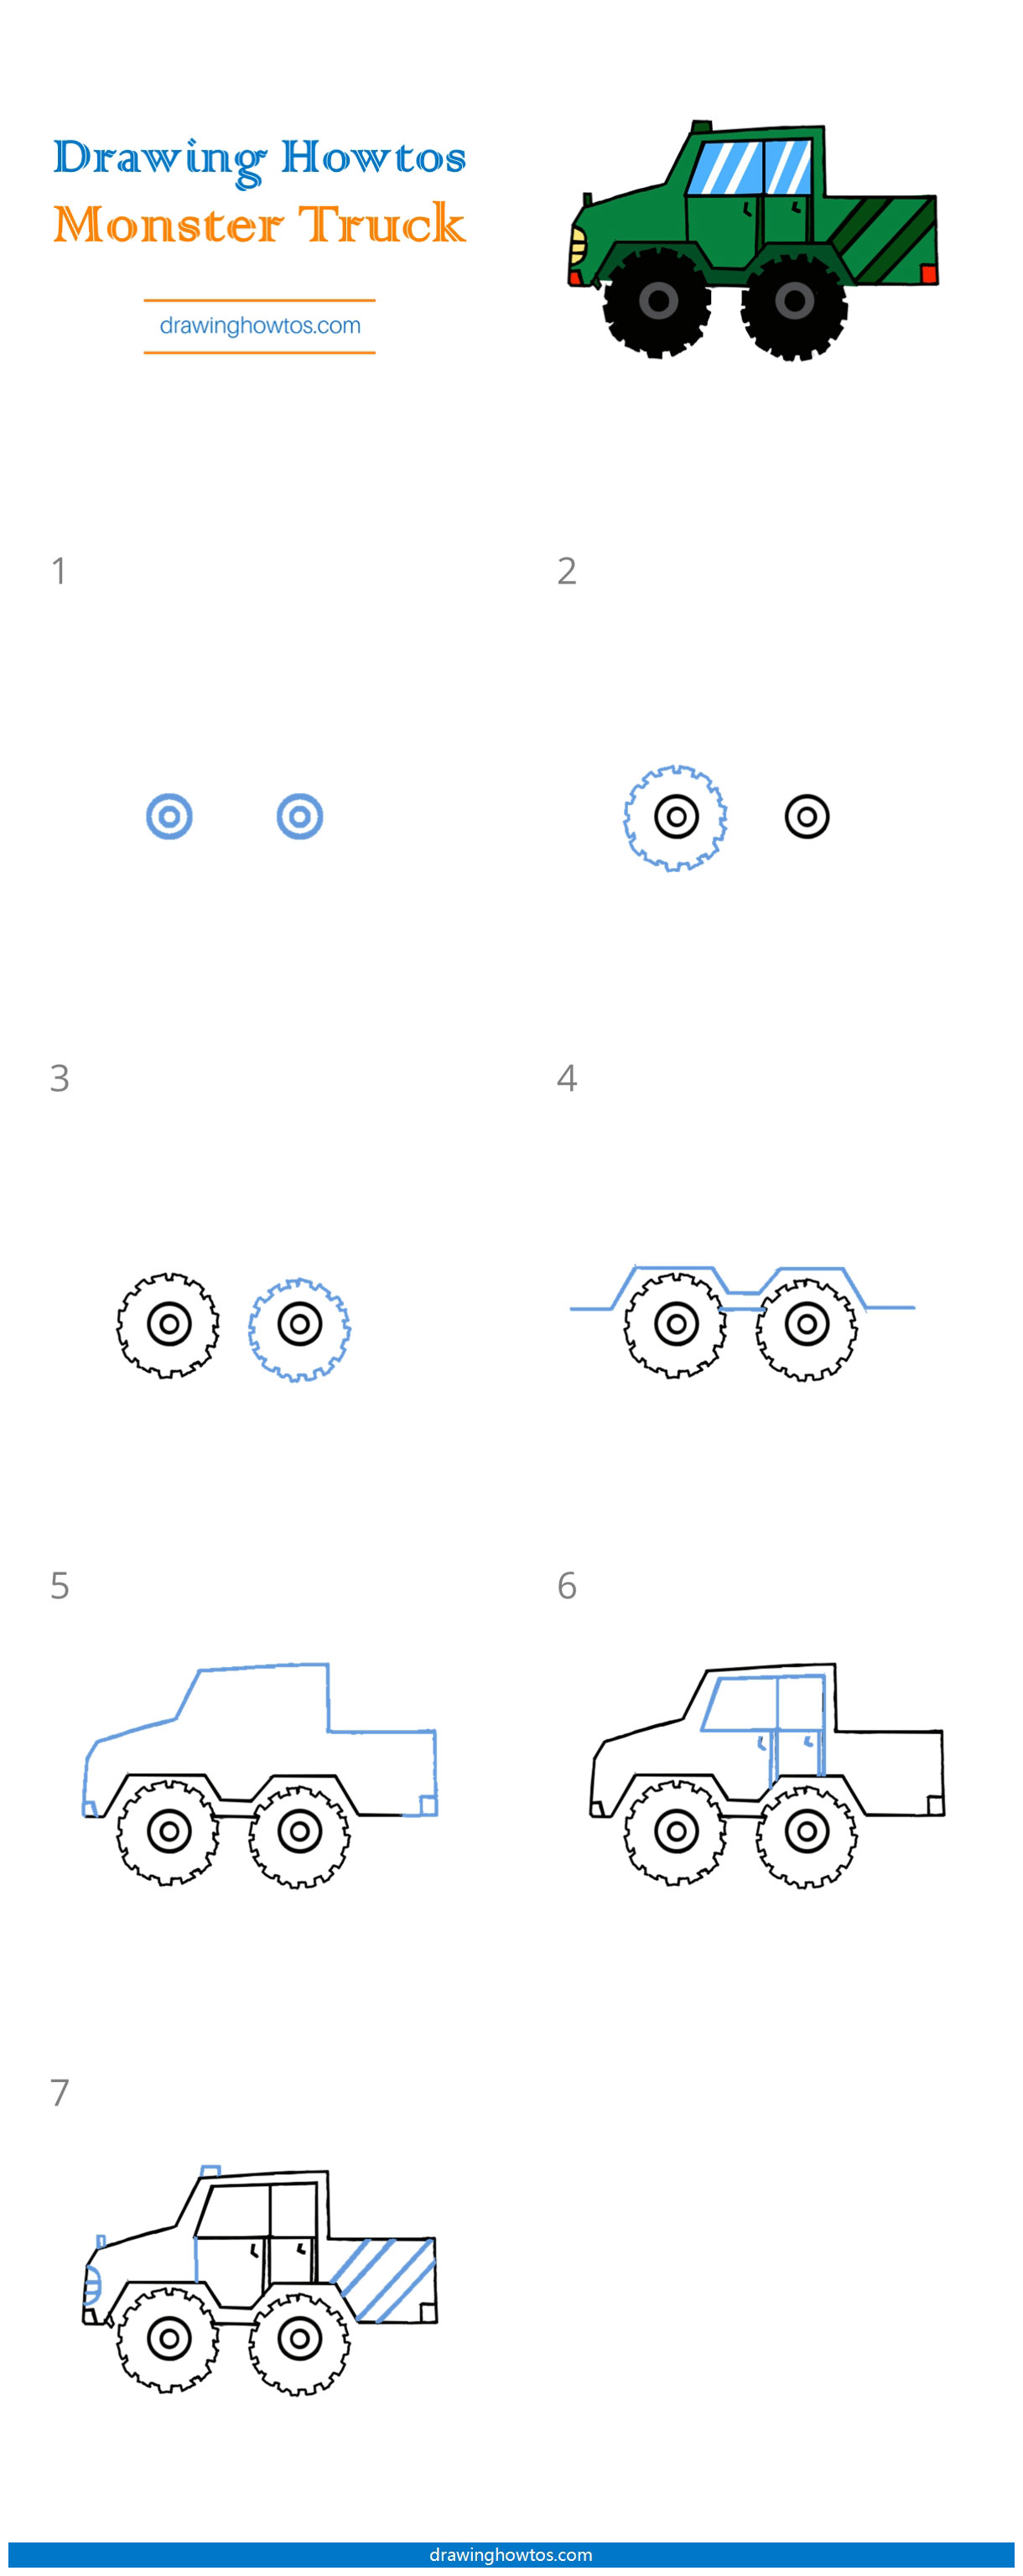 How to Draw a Monster Truck Step by Step